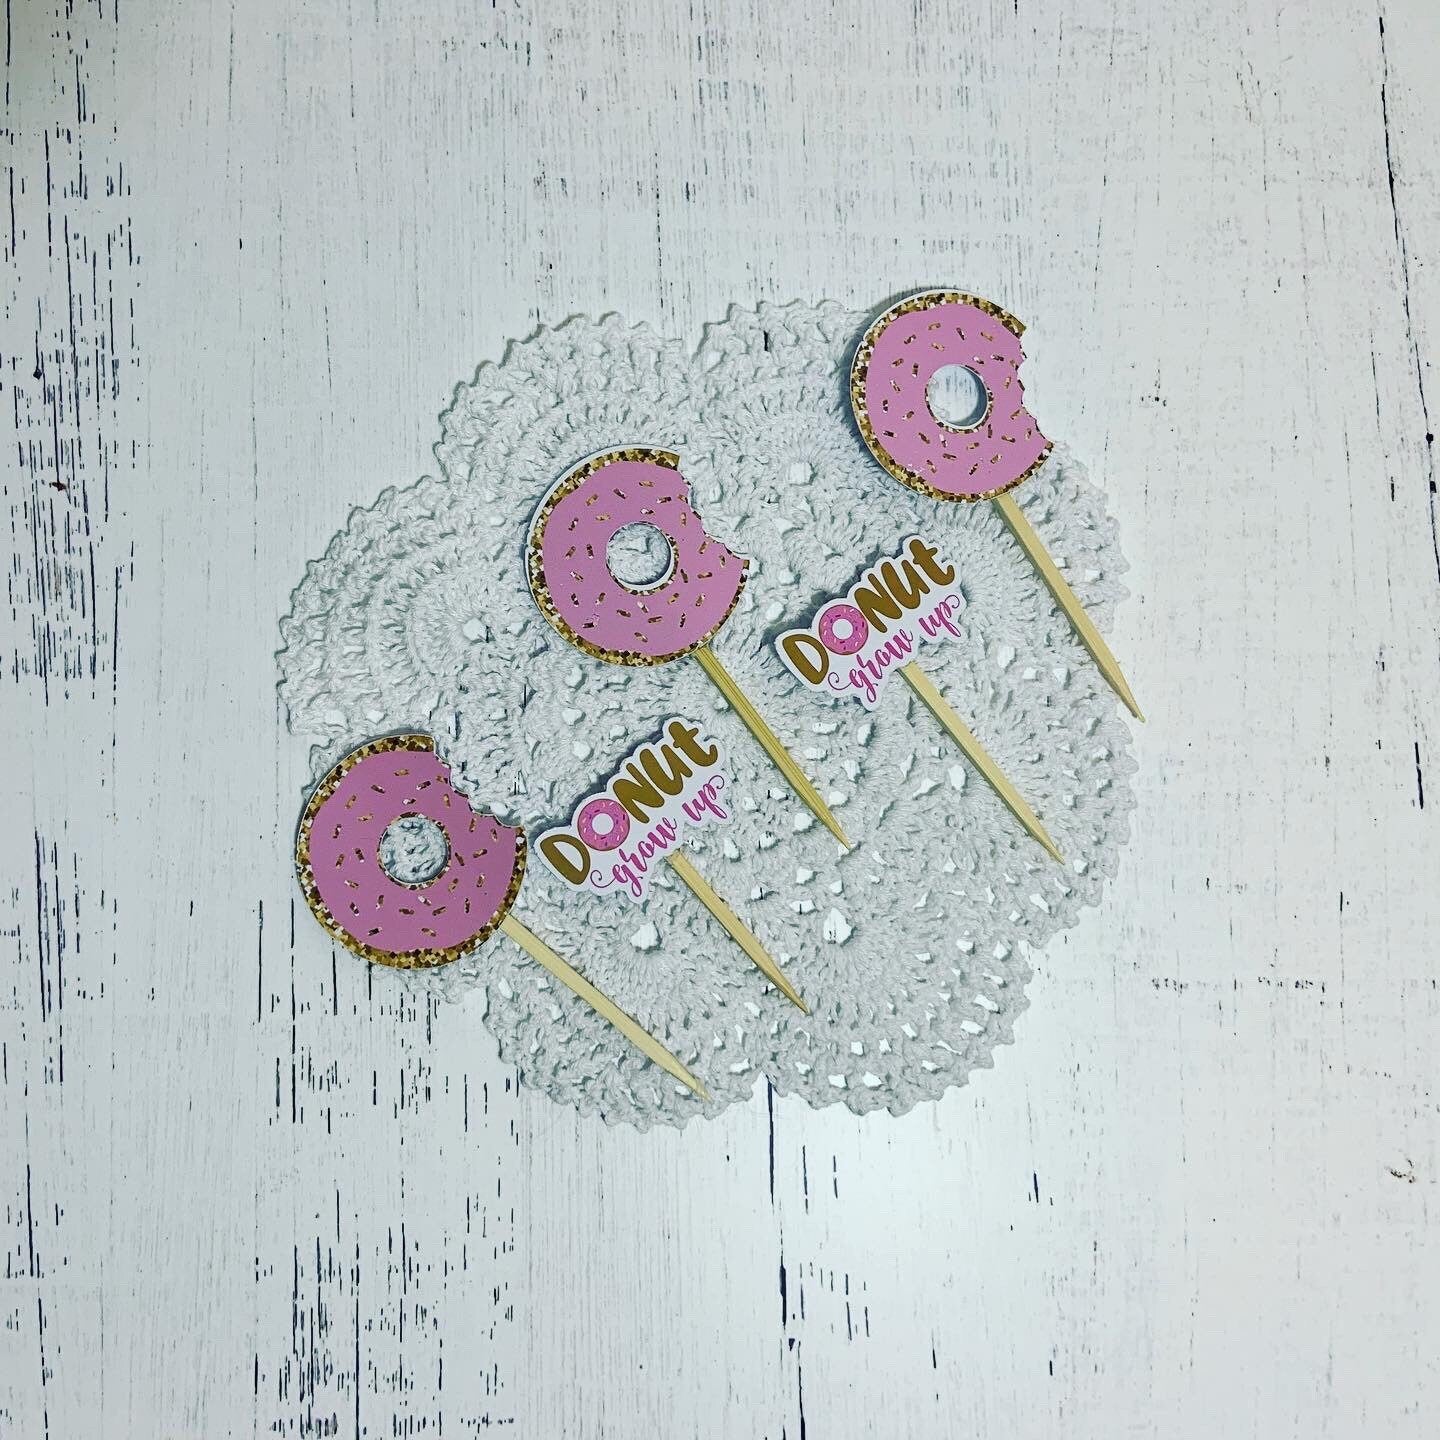 Donut Top Cupcake Toppers - Donut themed party Decorations -  Cupcake Toppers - Donut Party Decor. Donut Topper